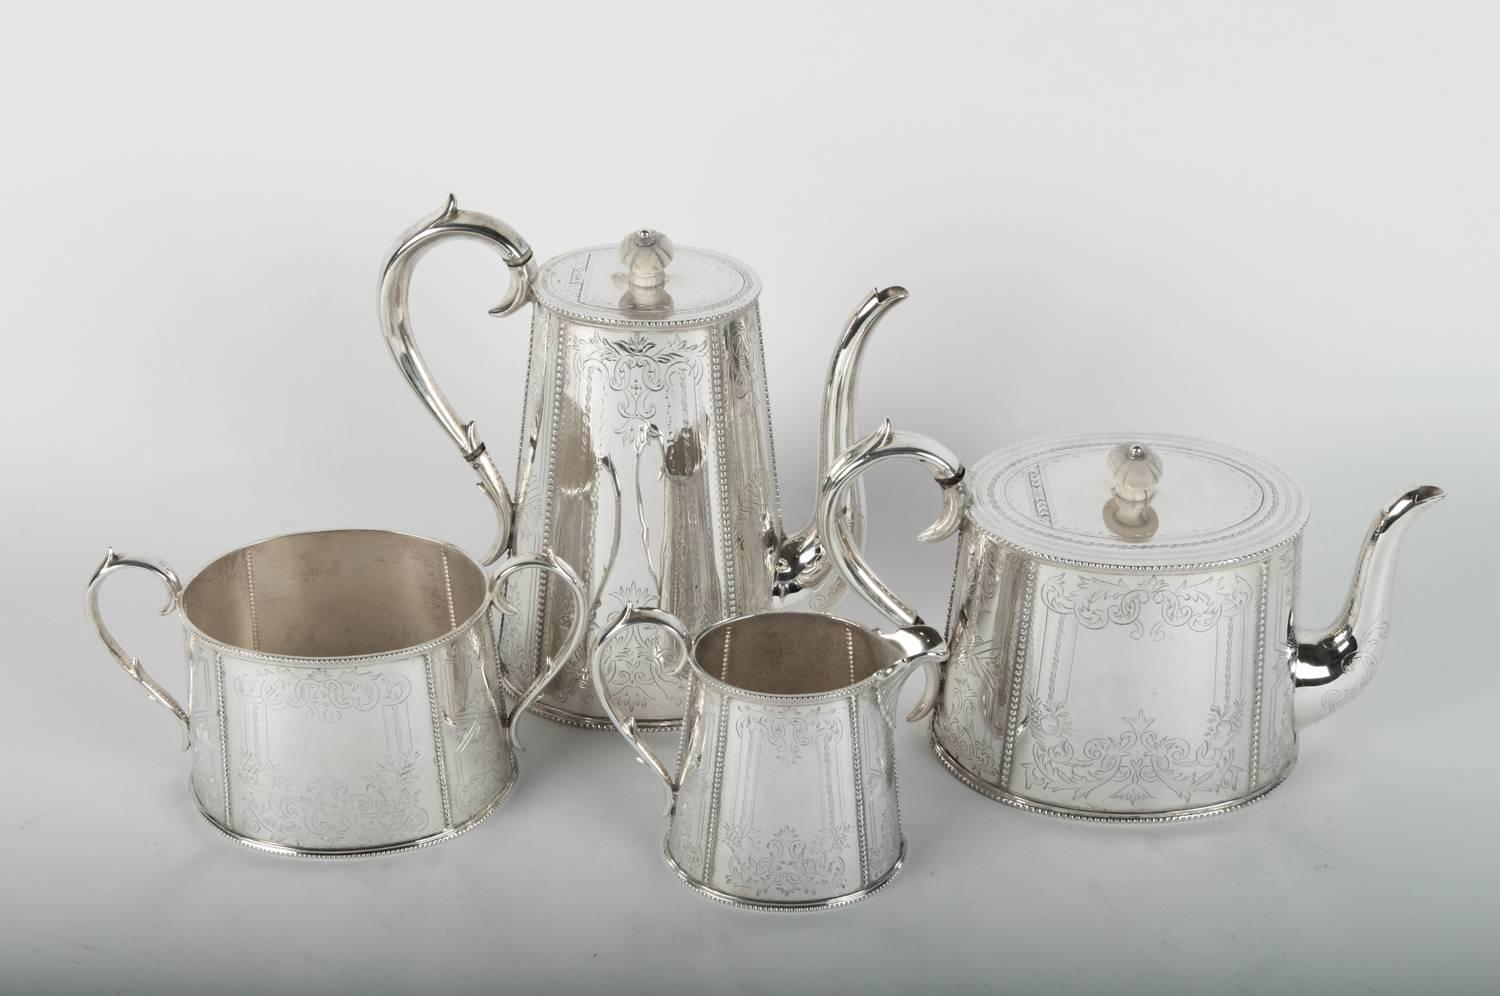 Old English silver plated tea or coffee service. Excellent condition. The tea pot measure 9 inches high x 8.5 inches diameter. The coffee pot measure 6 inches high x 9.5 inches diameter. The sugar dispenser 8 inches diameter x 4.5 inches high. The